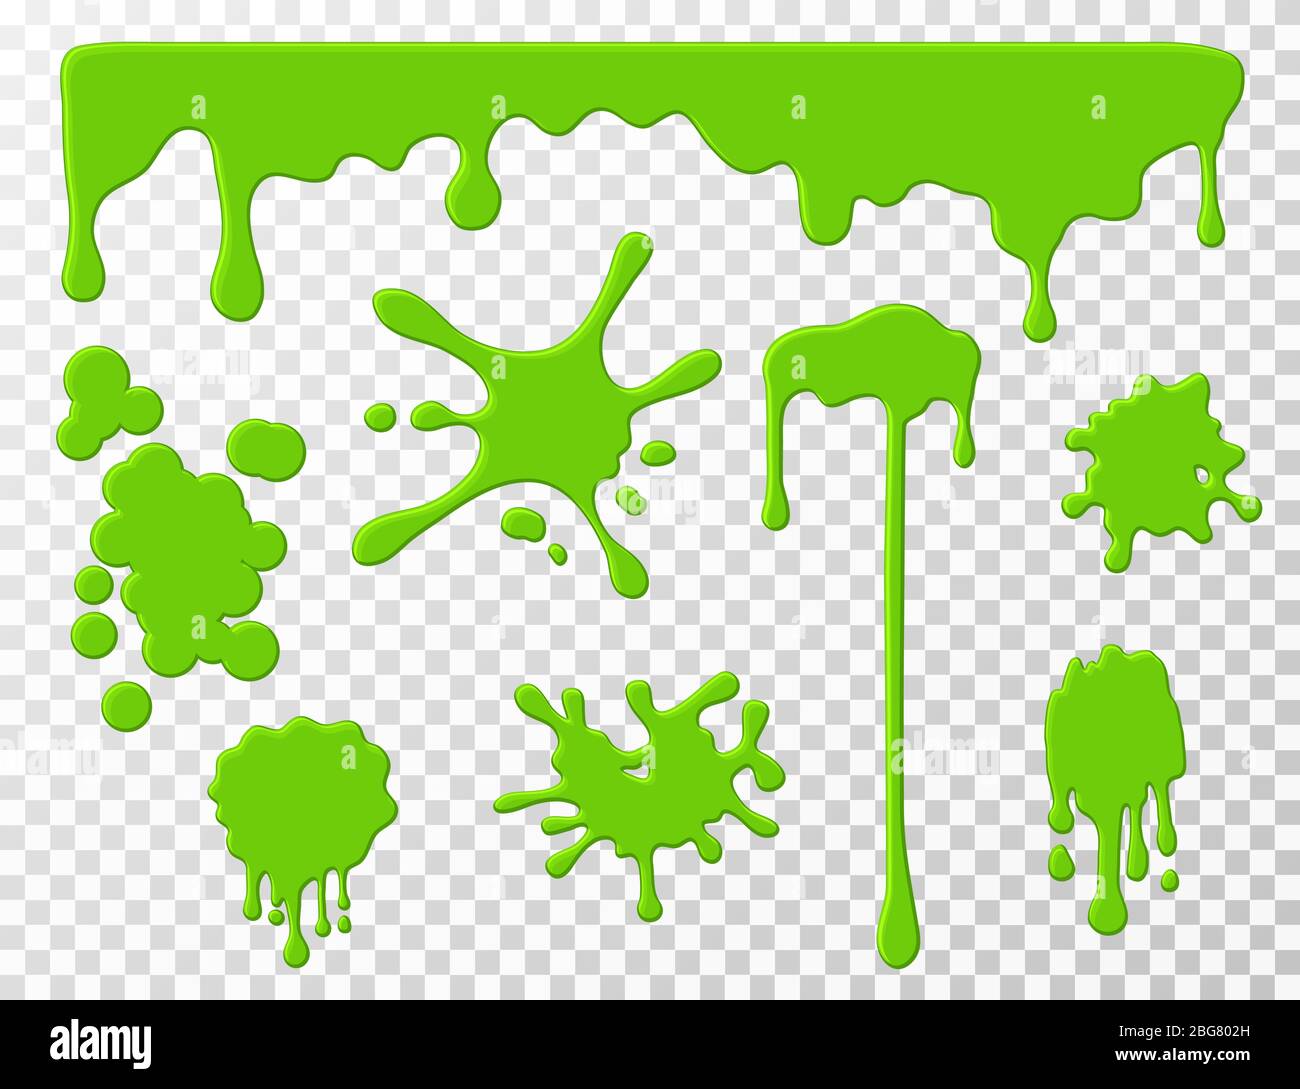 Dripping slime. Green goo dripping liquid snot, blots and splashes. Cartoon slime splodges vector set isolated. Illustration of liquid drip, slime and drop, blob stain green Stock Vector